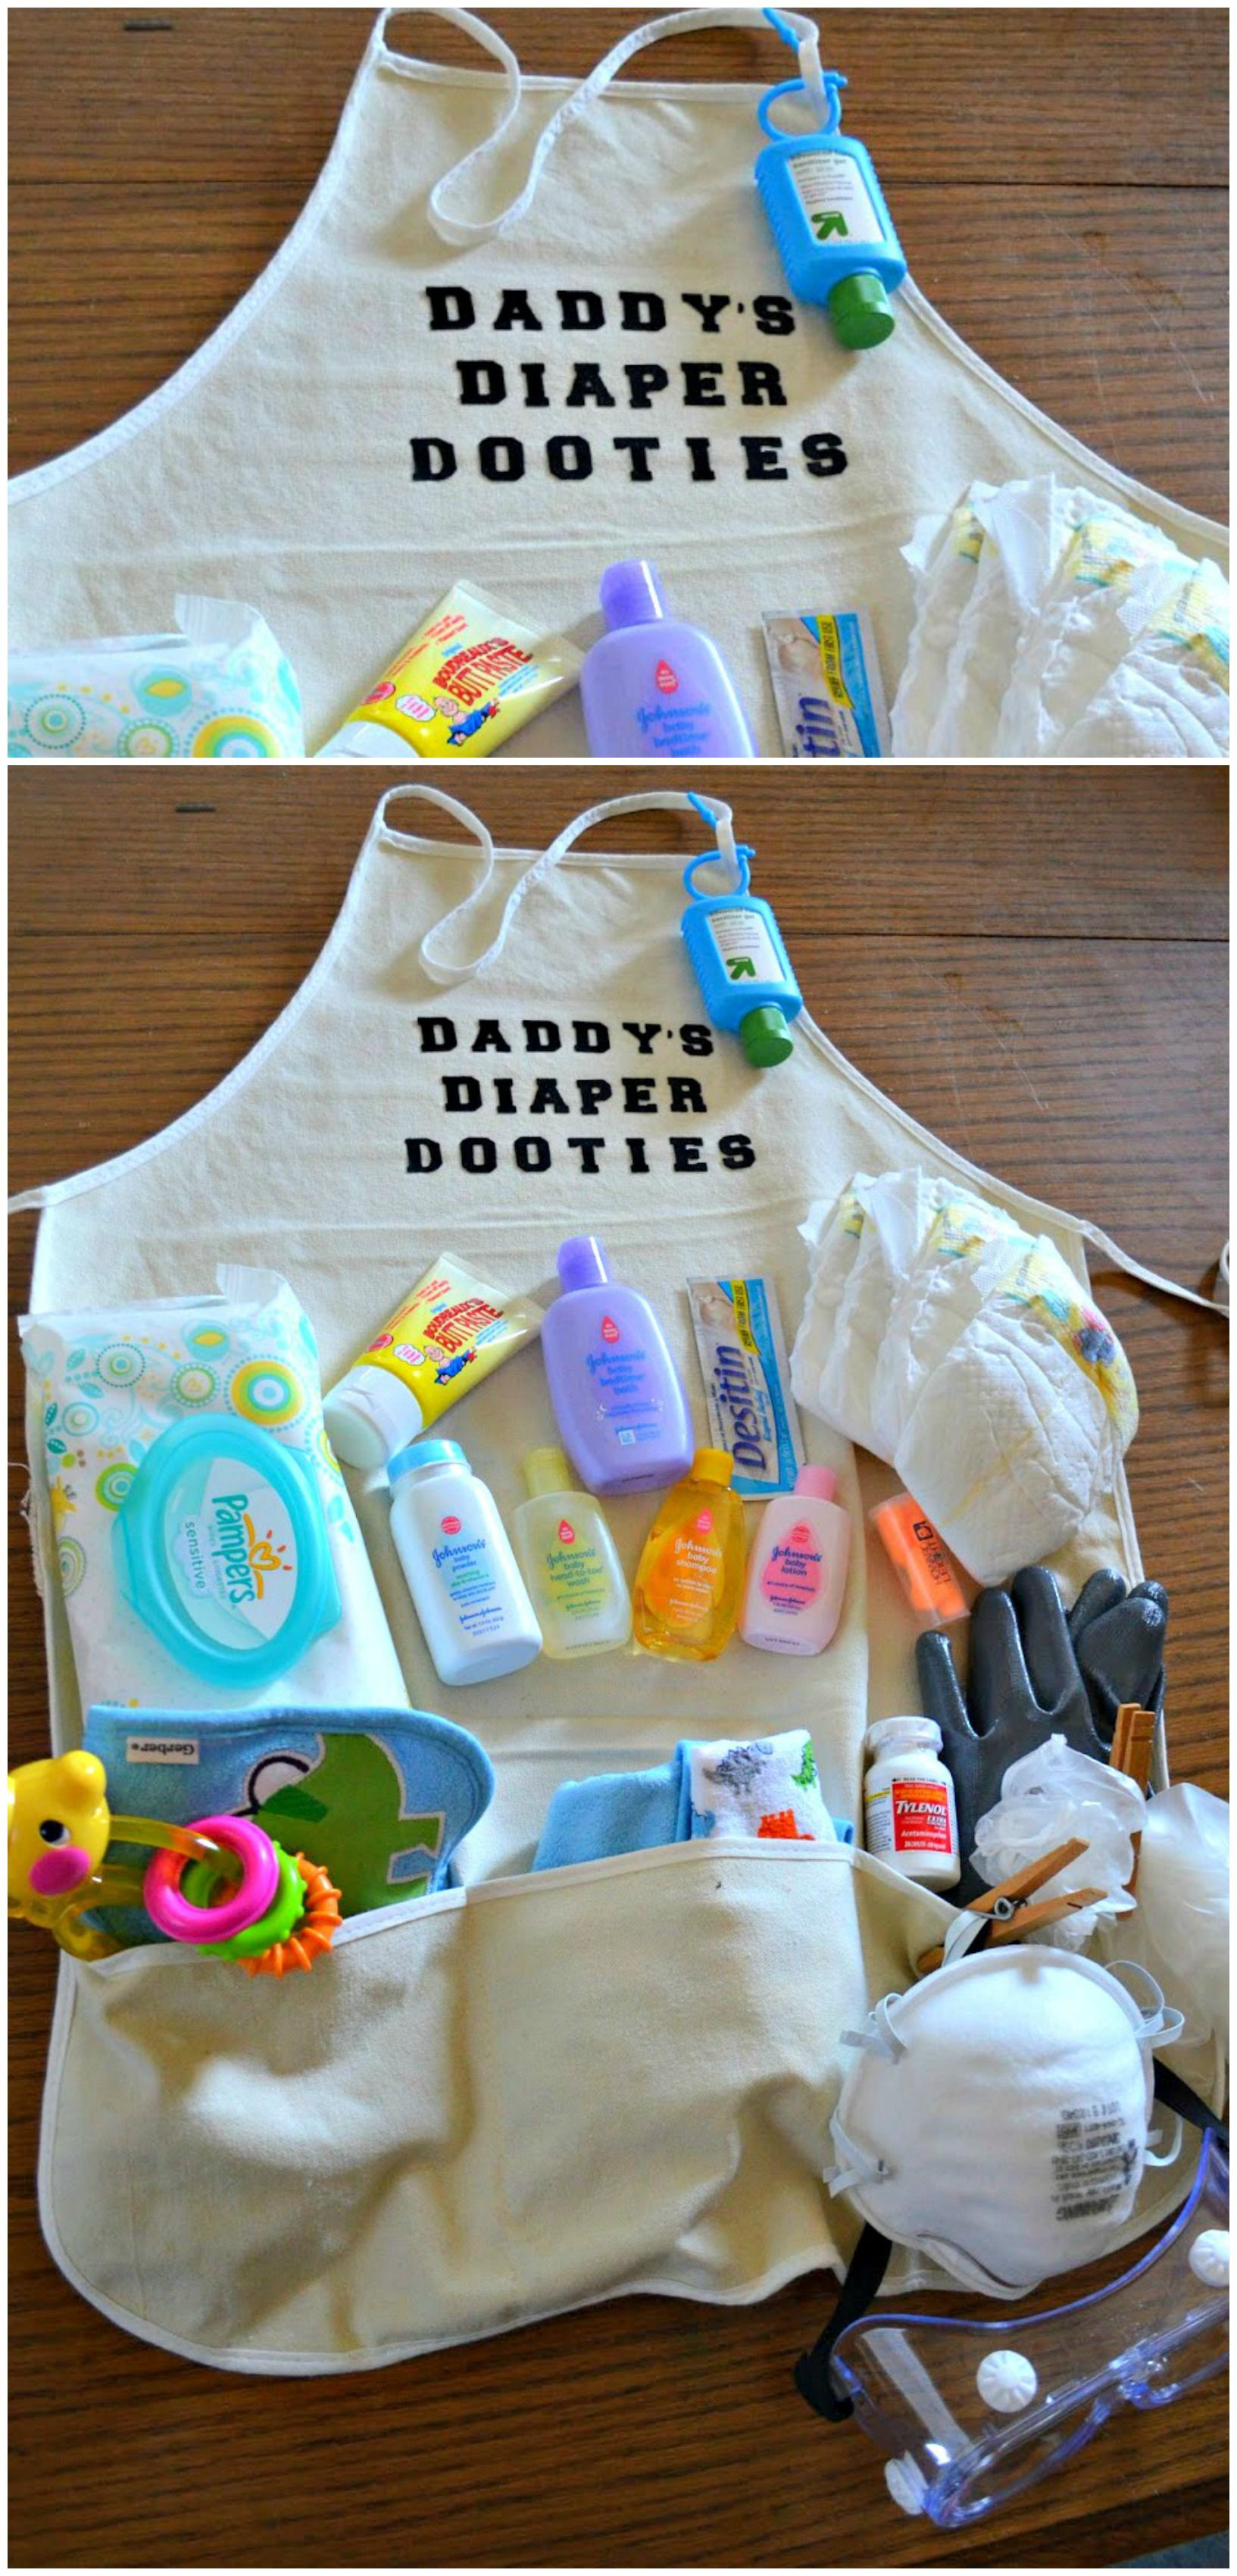 Baby Shower Gift Ideas For Dads
 Daddy s Diaper Dooties Packed with diapers wipes